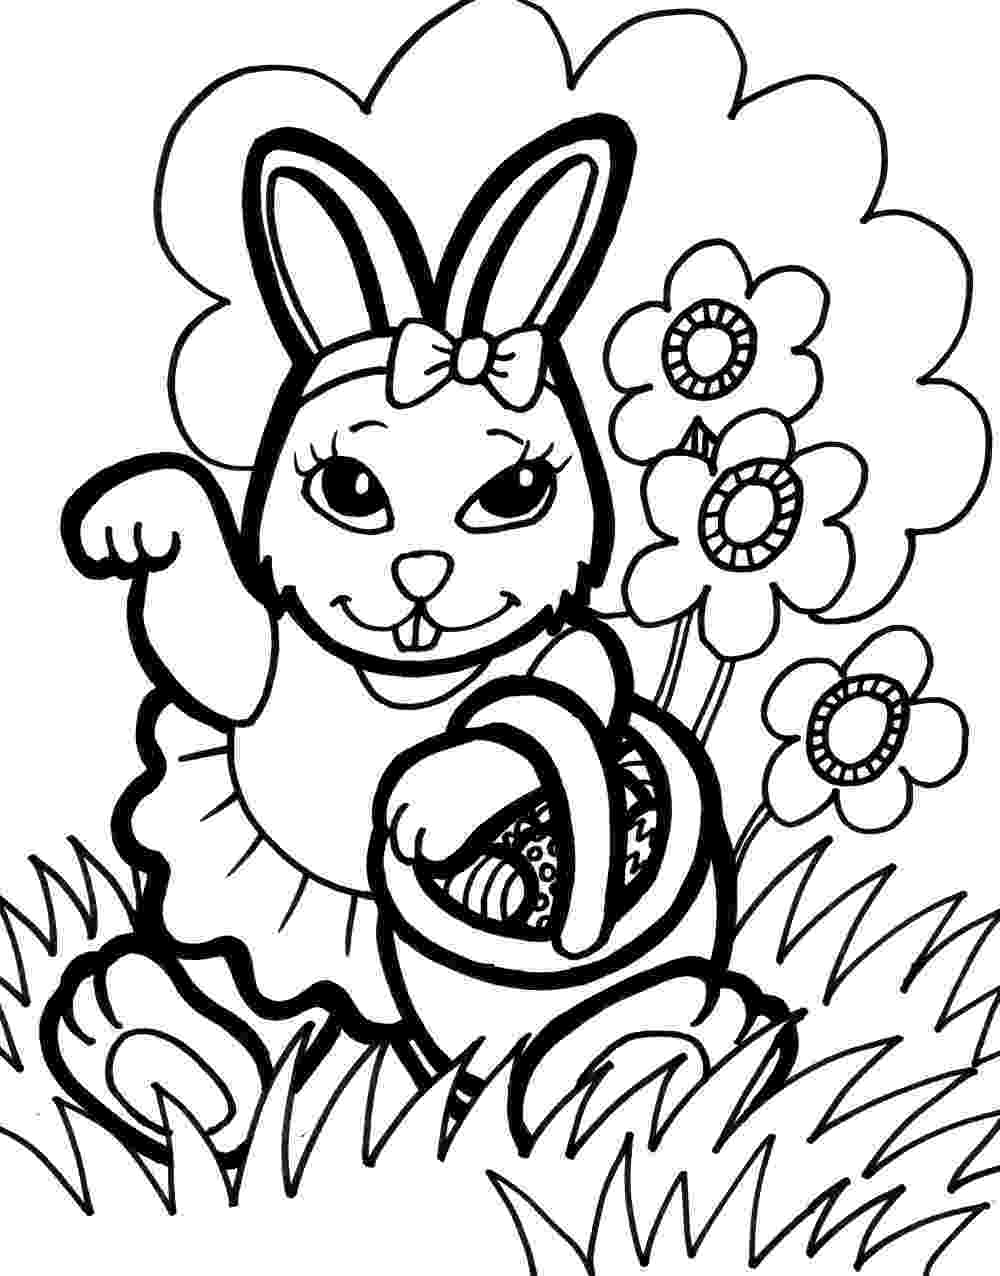 colouring page rabbit bunny rabbit coloring pages to download and print for free colouring page rabbit 